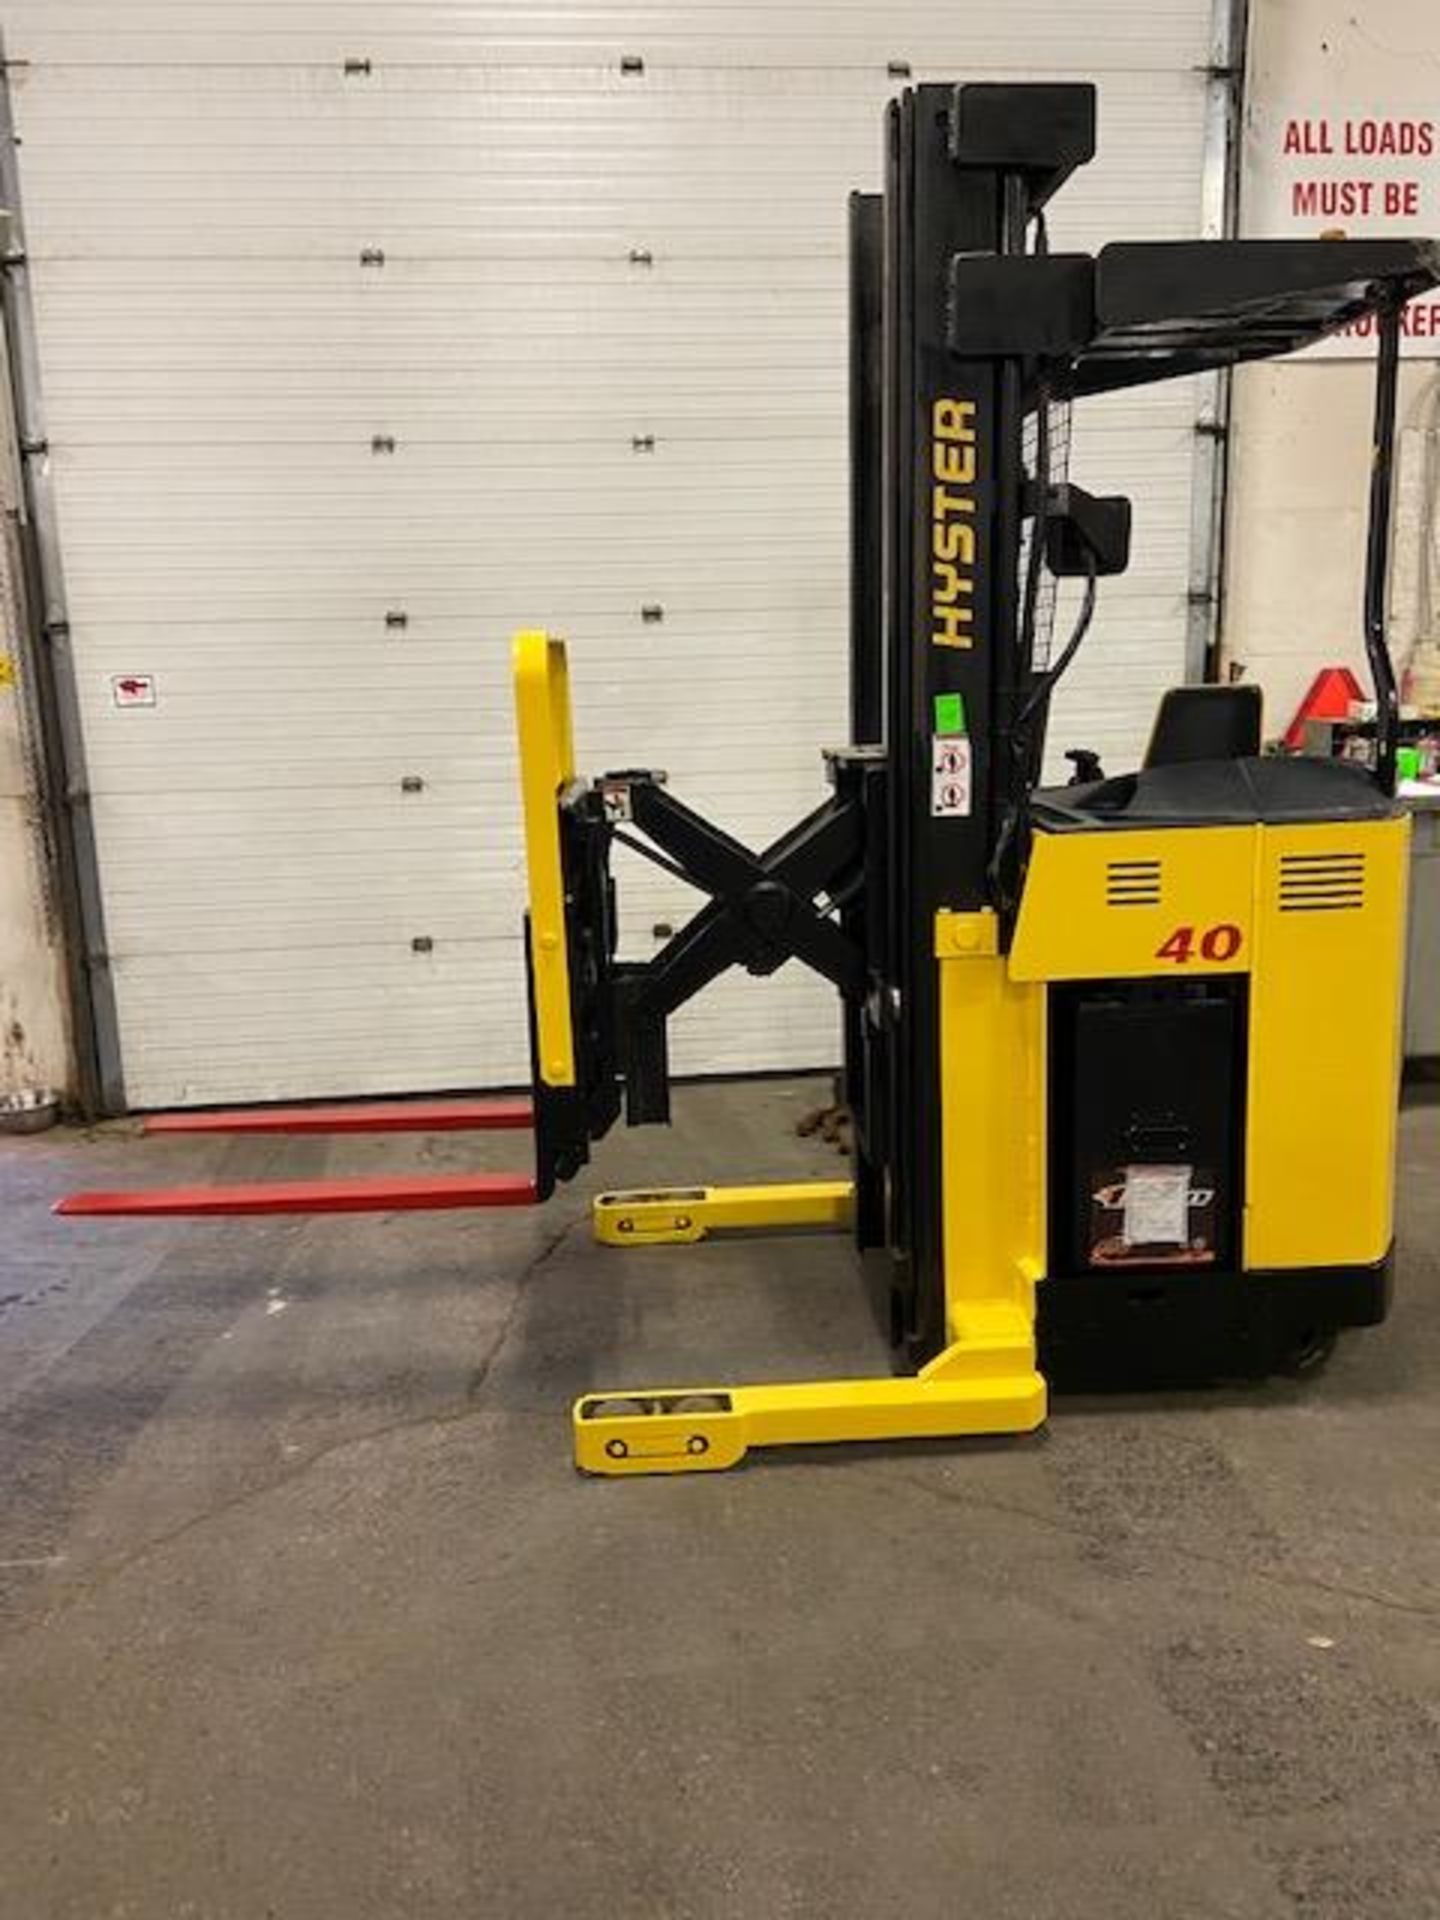 FREE CUSTOMS - MINT Hyster Reach Truck Pallet Lifter REACH TRUCK electric 4000lbs with sideshift 3-